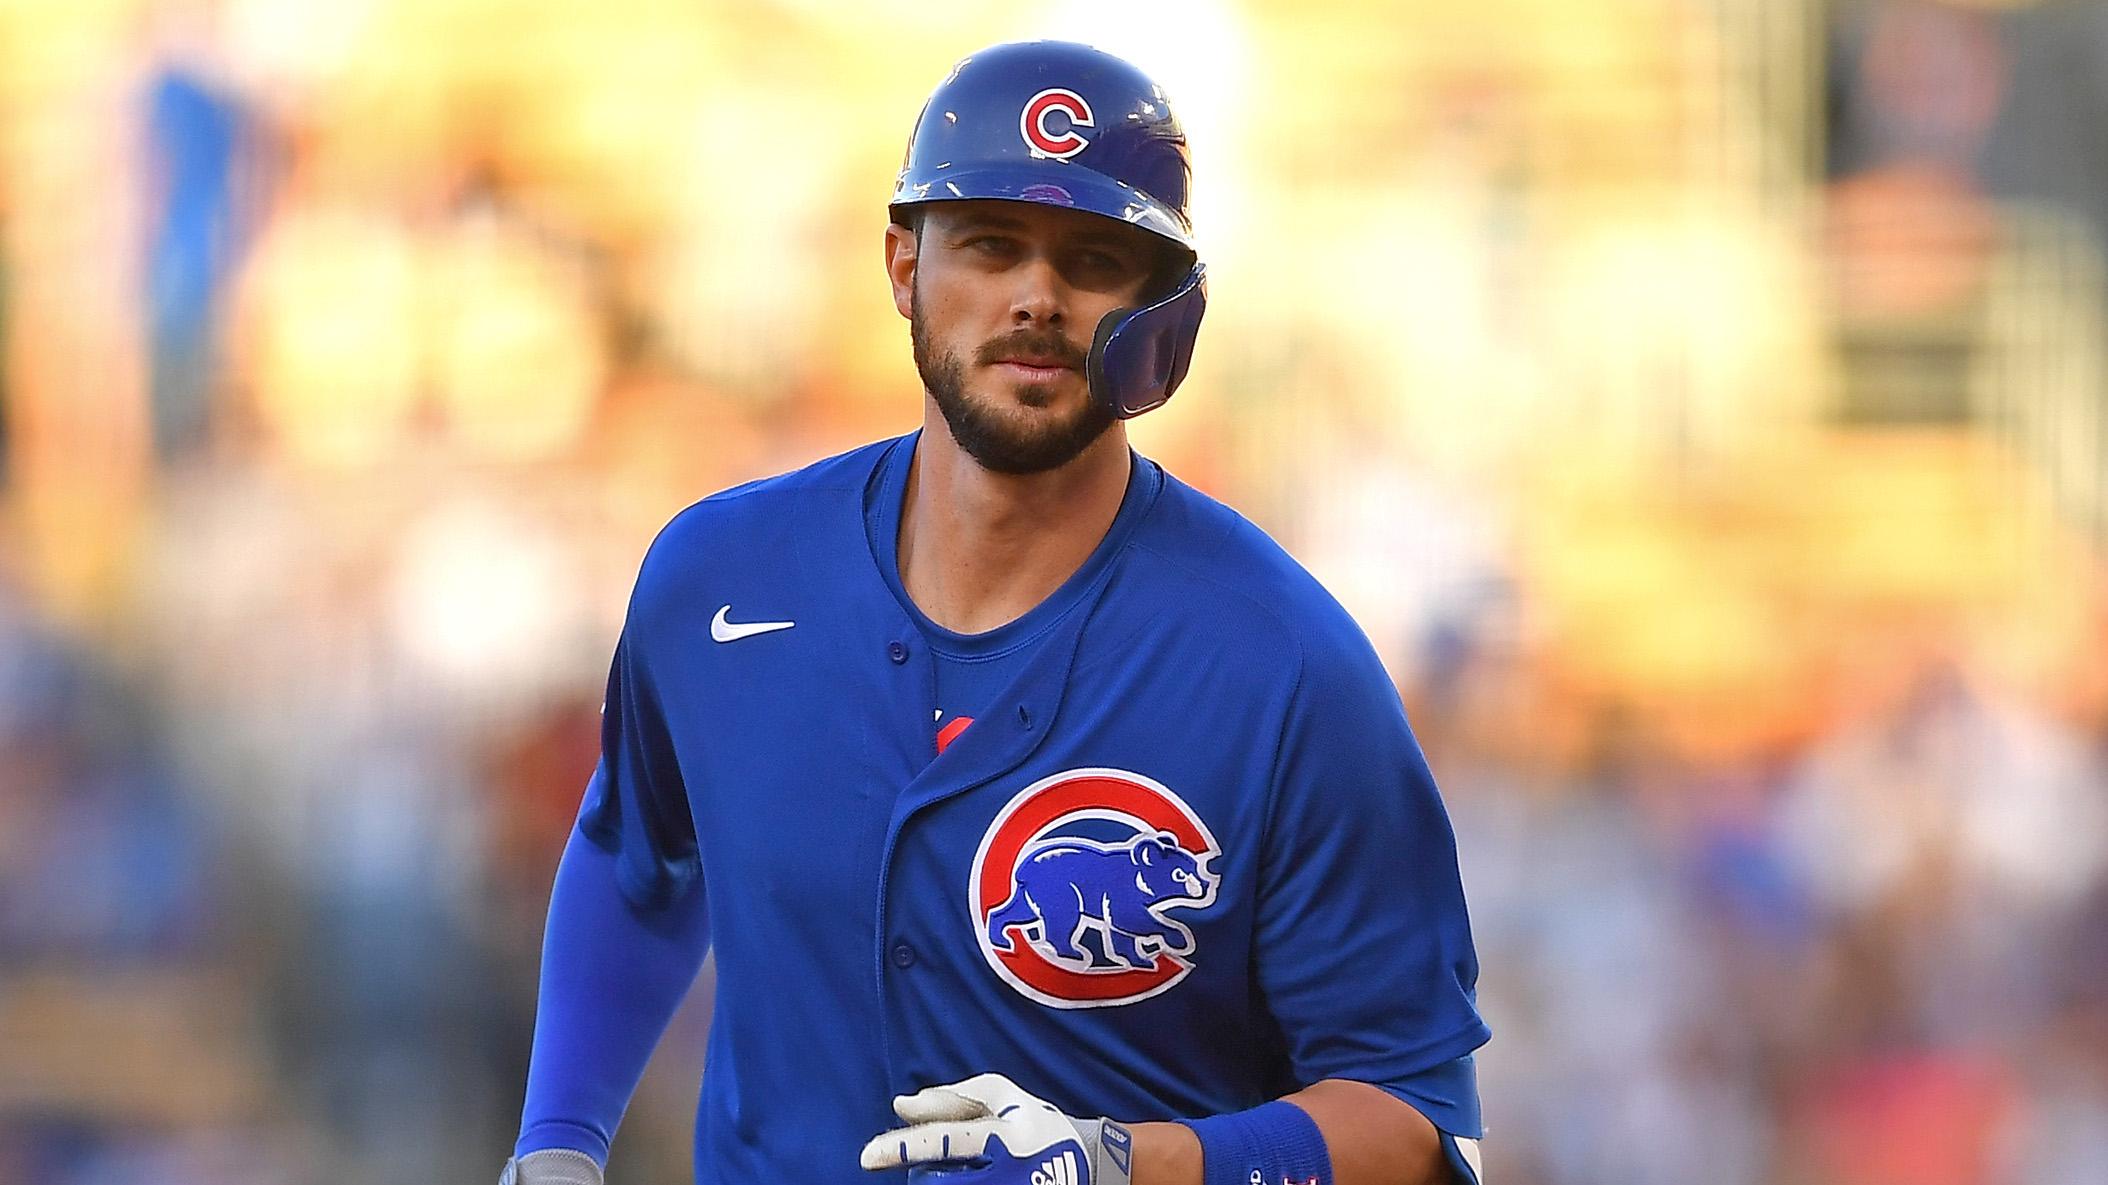 Jun 25, 2021; Los Angeles, California, USA; Chicago Cubs third baseman Kris Bryant (17) rounds the bases after hitting a solo home run in the first inning of the game against the Los Angeles Dodgers at Dodger Stadium. / Jayne Kamin-Oncea-USA TODAY Sports